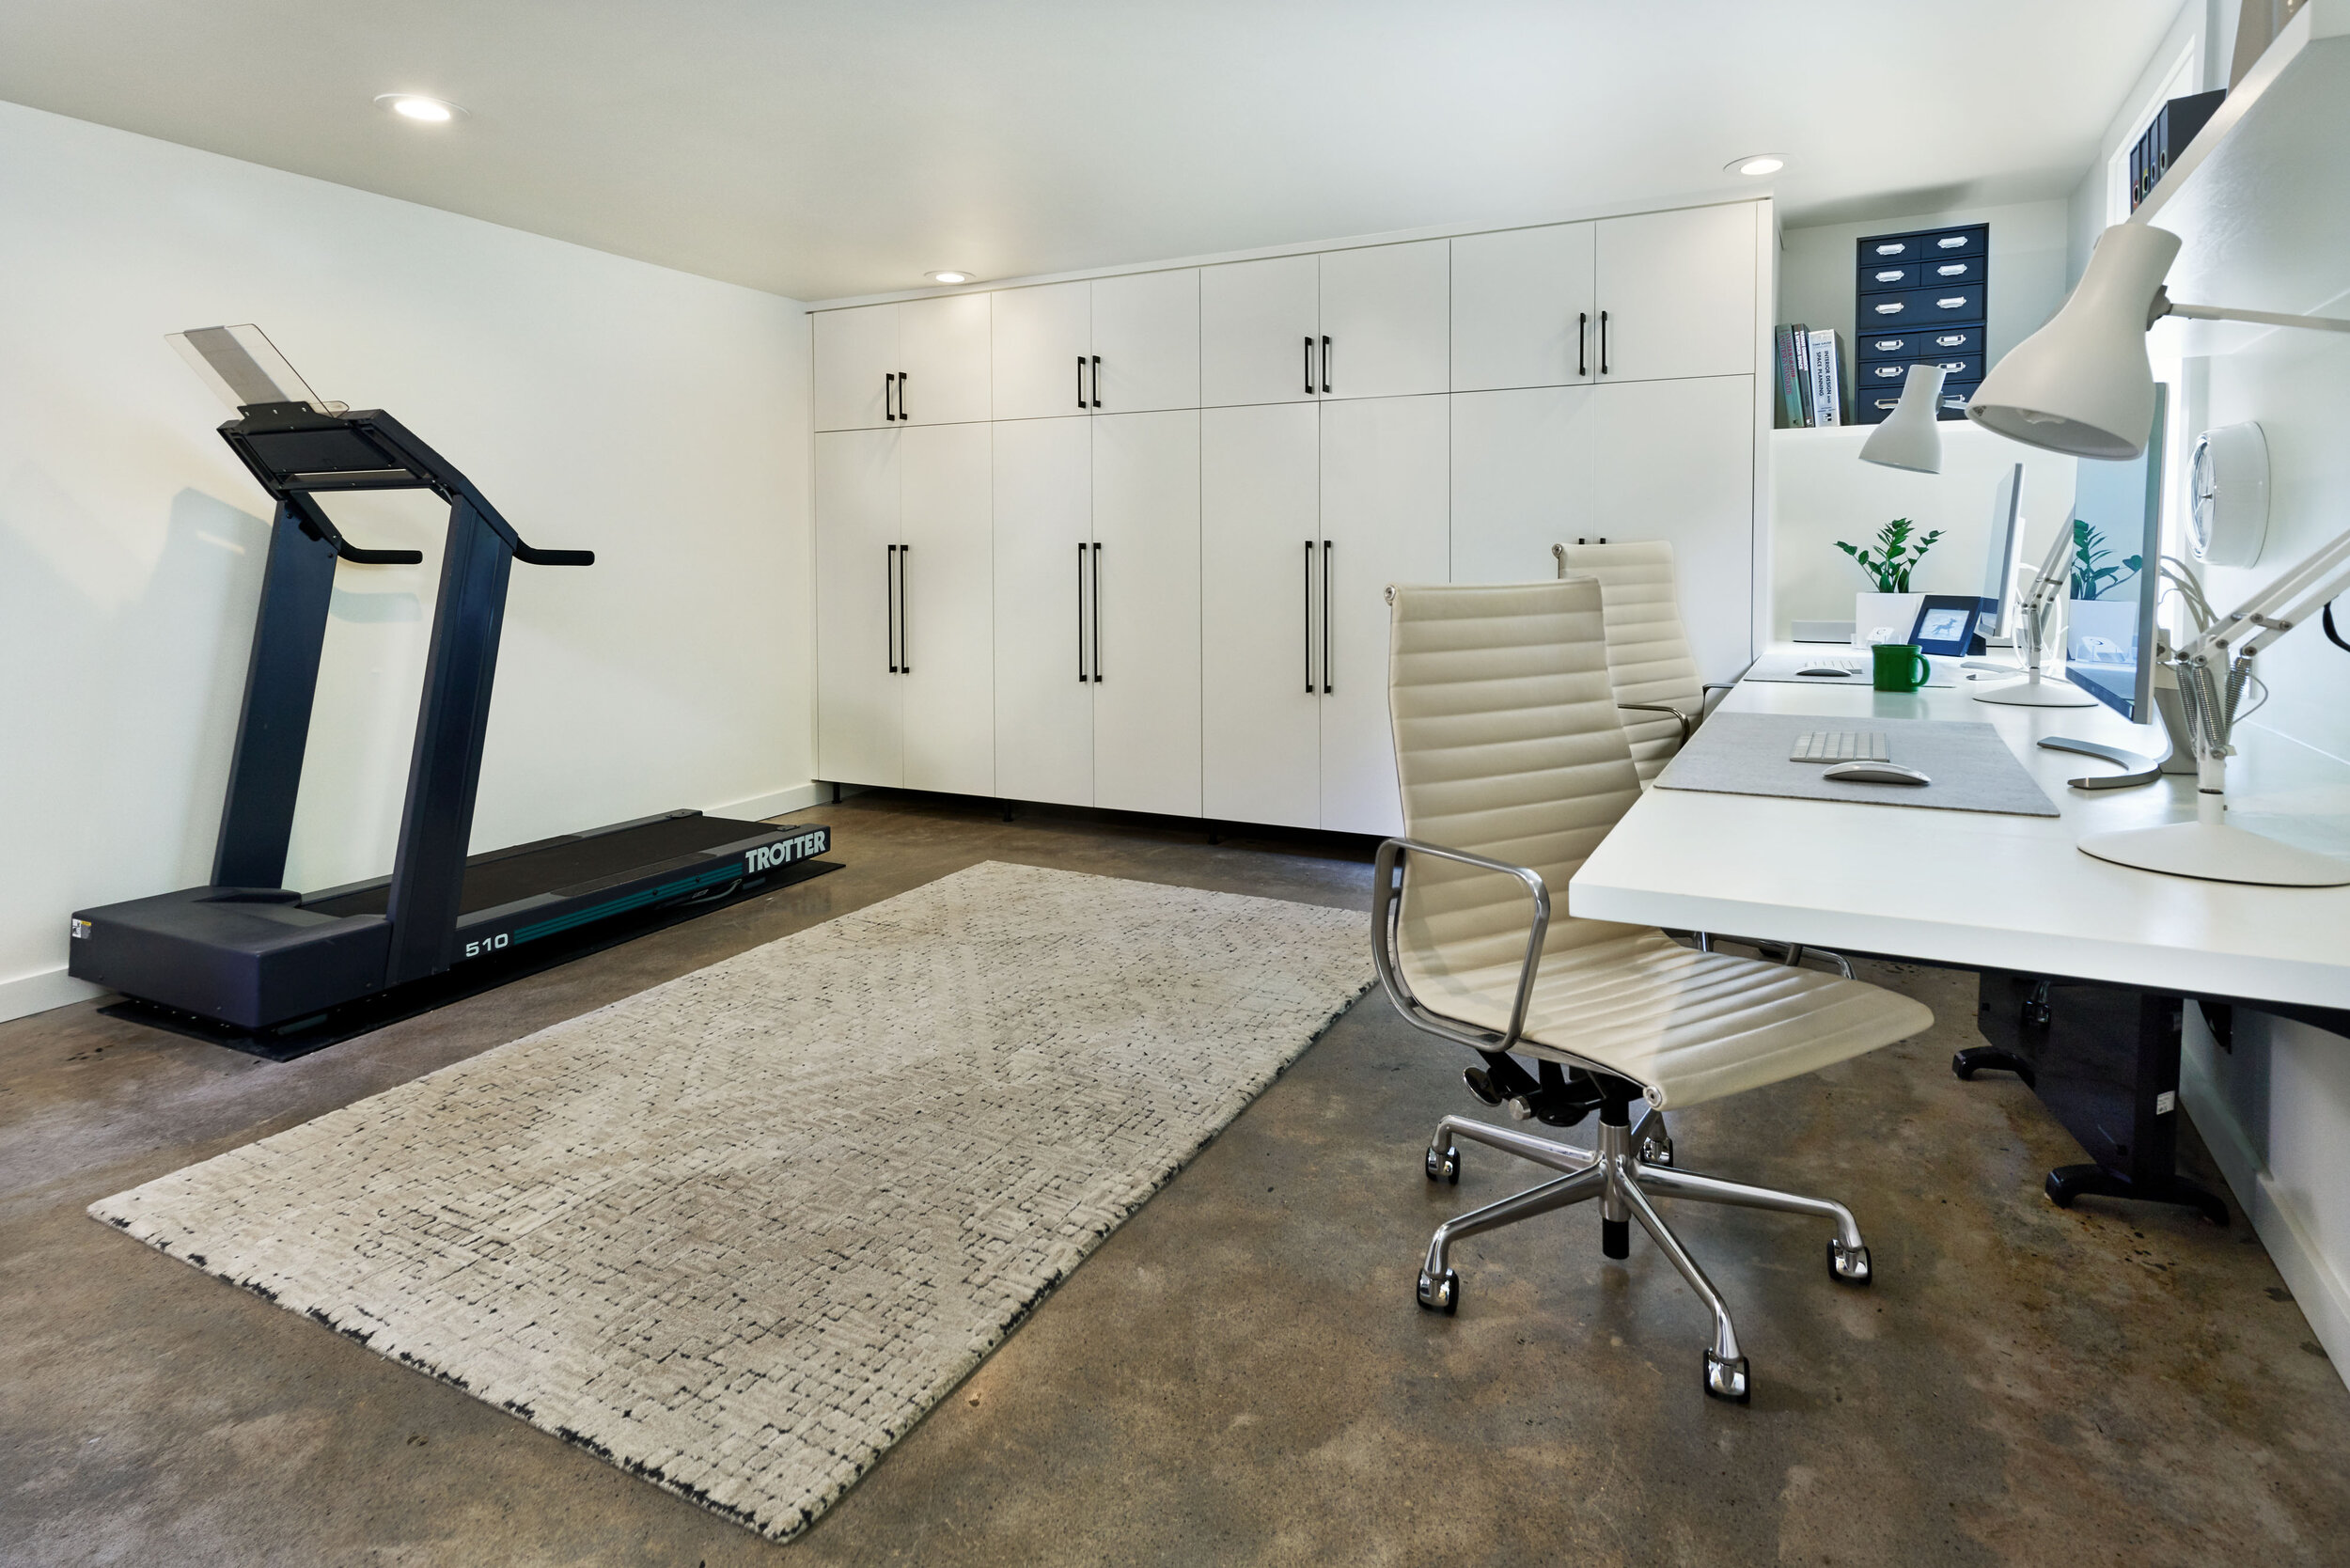 New office doubles as a workout space. 